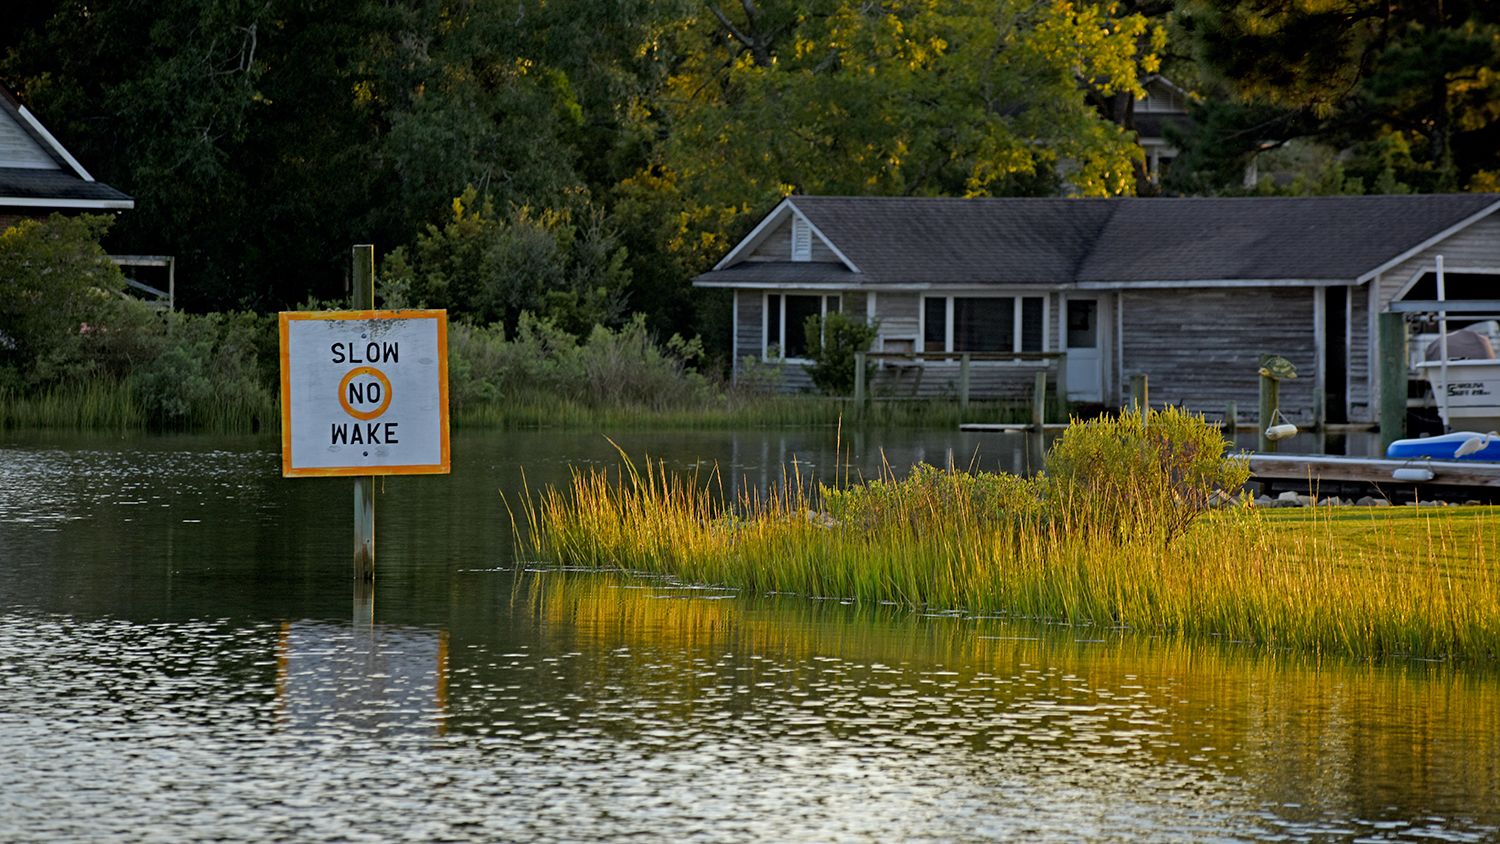 A "no wake zone" near homes and docks along Peletier Creek in Morehead City.